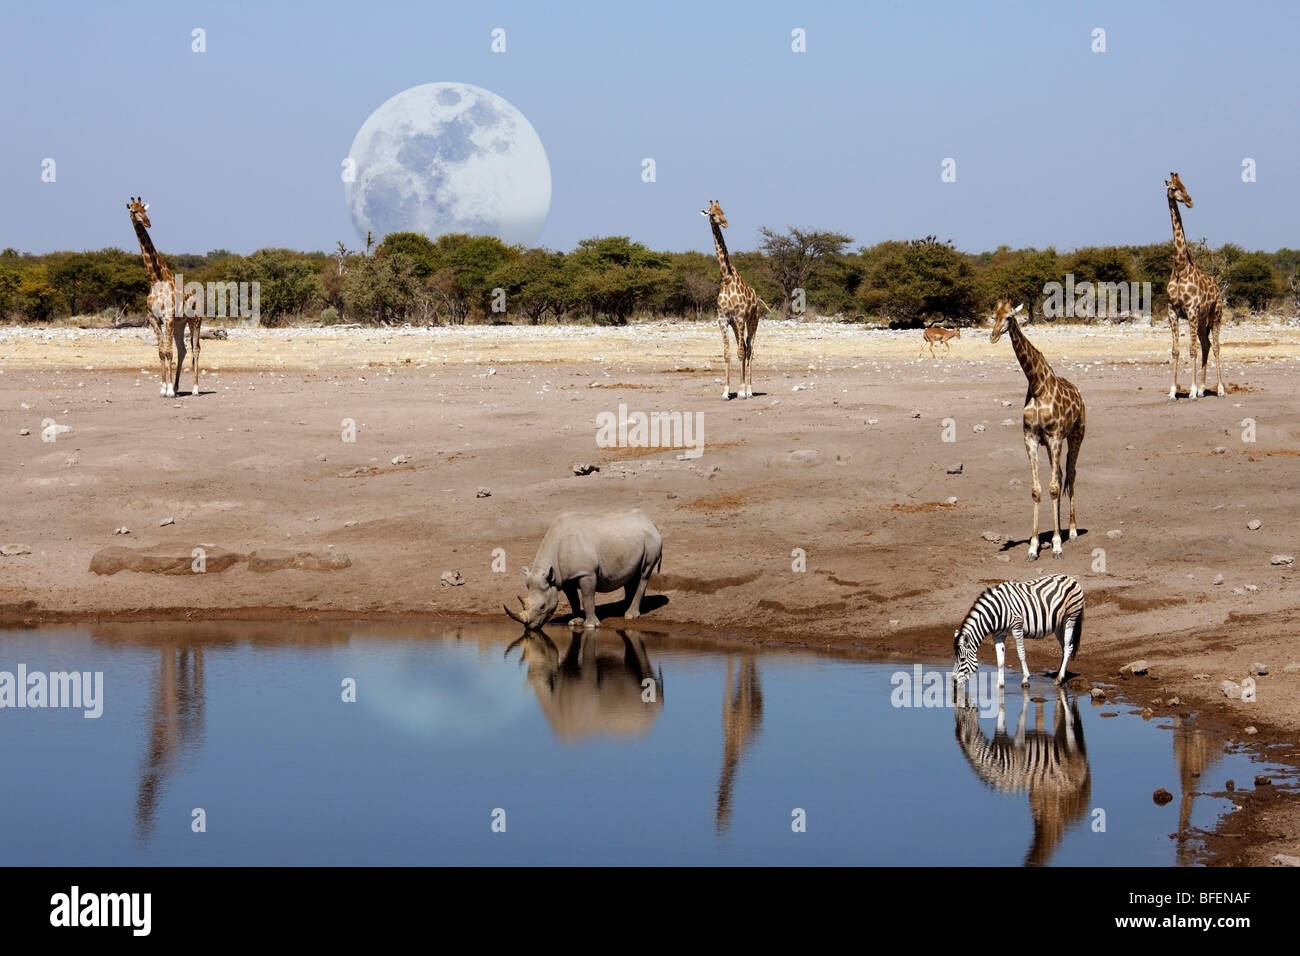 A Black Rhinoceros (Diceros bicornis) and other wildlife at a waterhole in Etosha National Park in Namibia Stock Photo